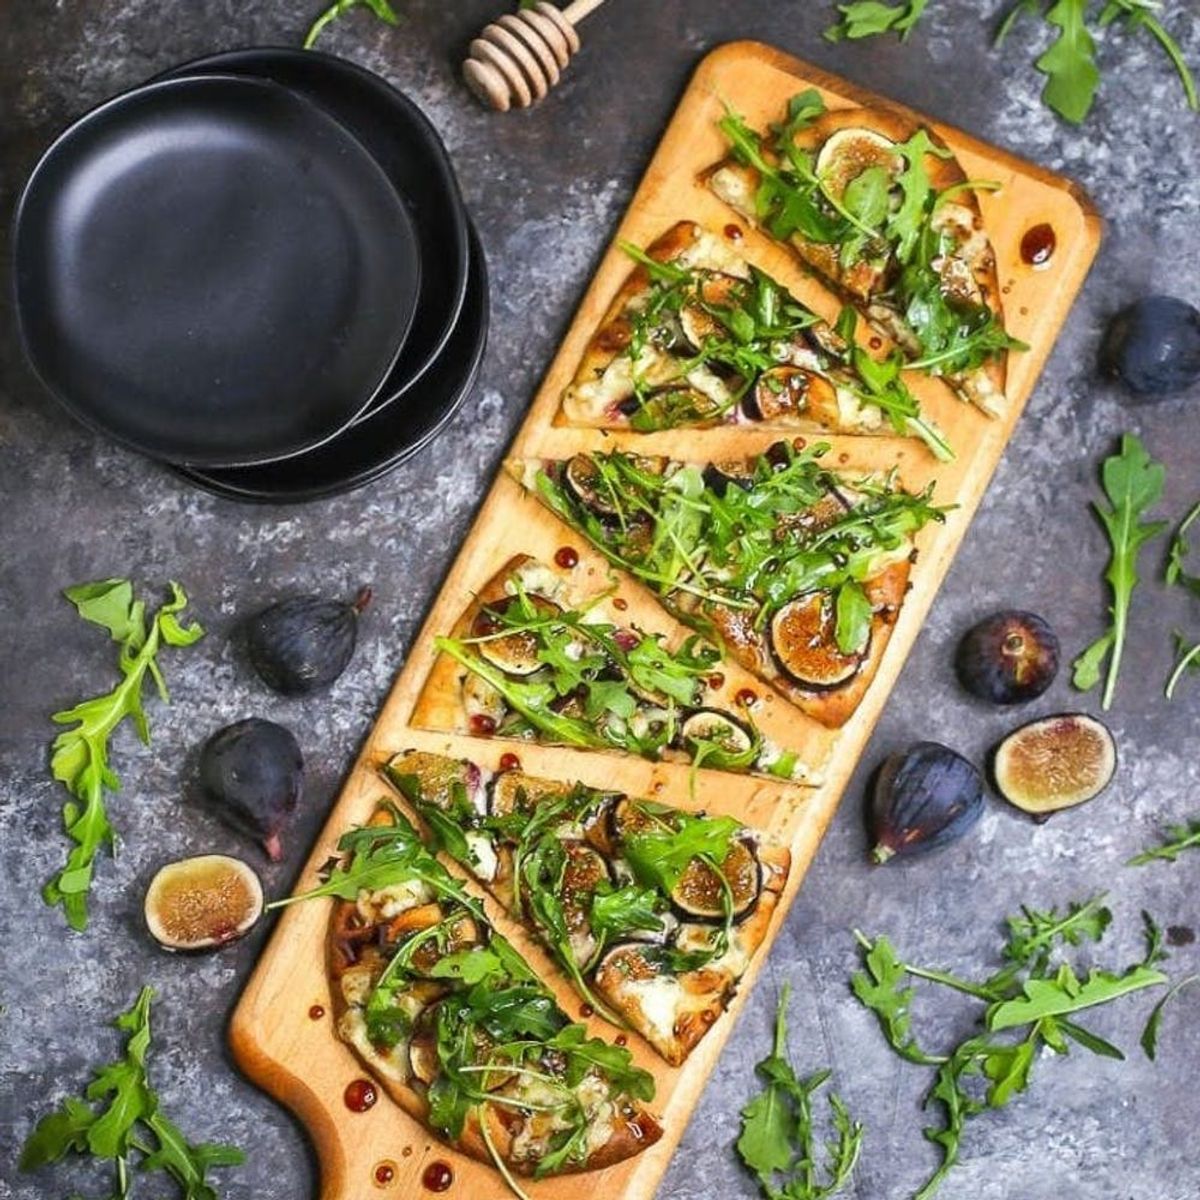 22 Naan Pizza Recipes That Make Speedy Weeknight Meals